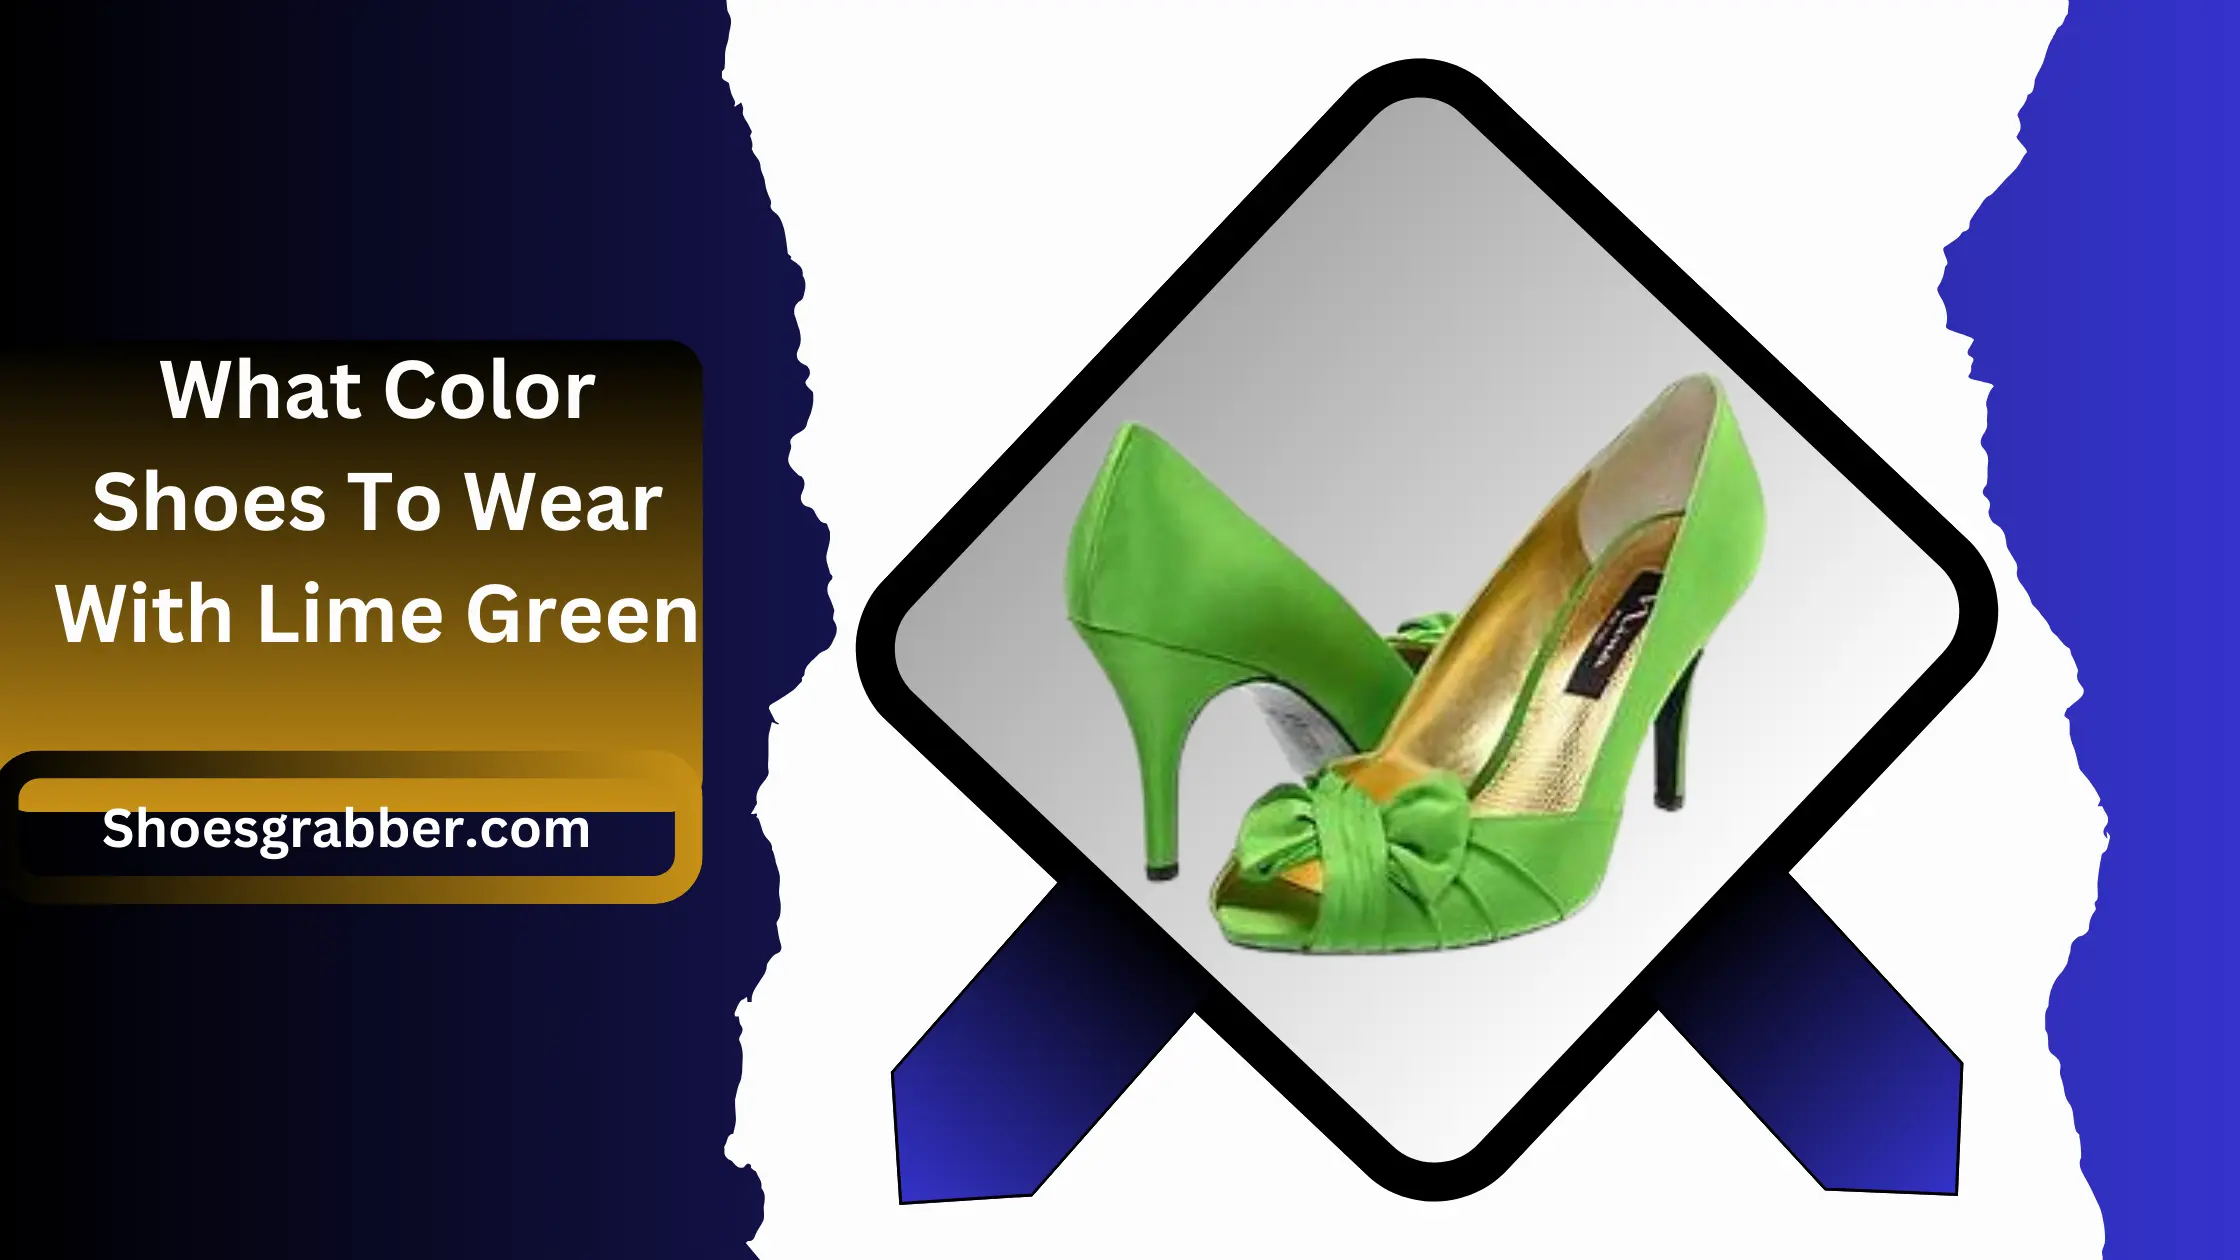 What Color Shoes To Wear With Lime Green - Make a Fashion Statement